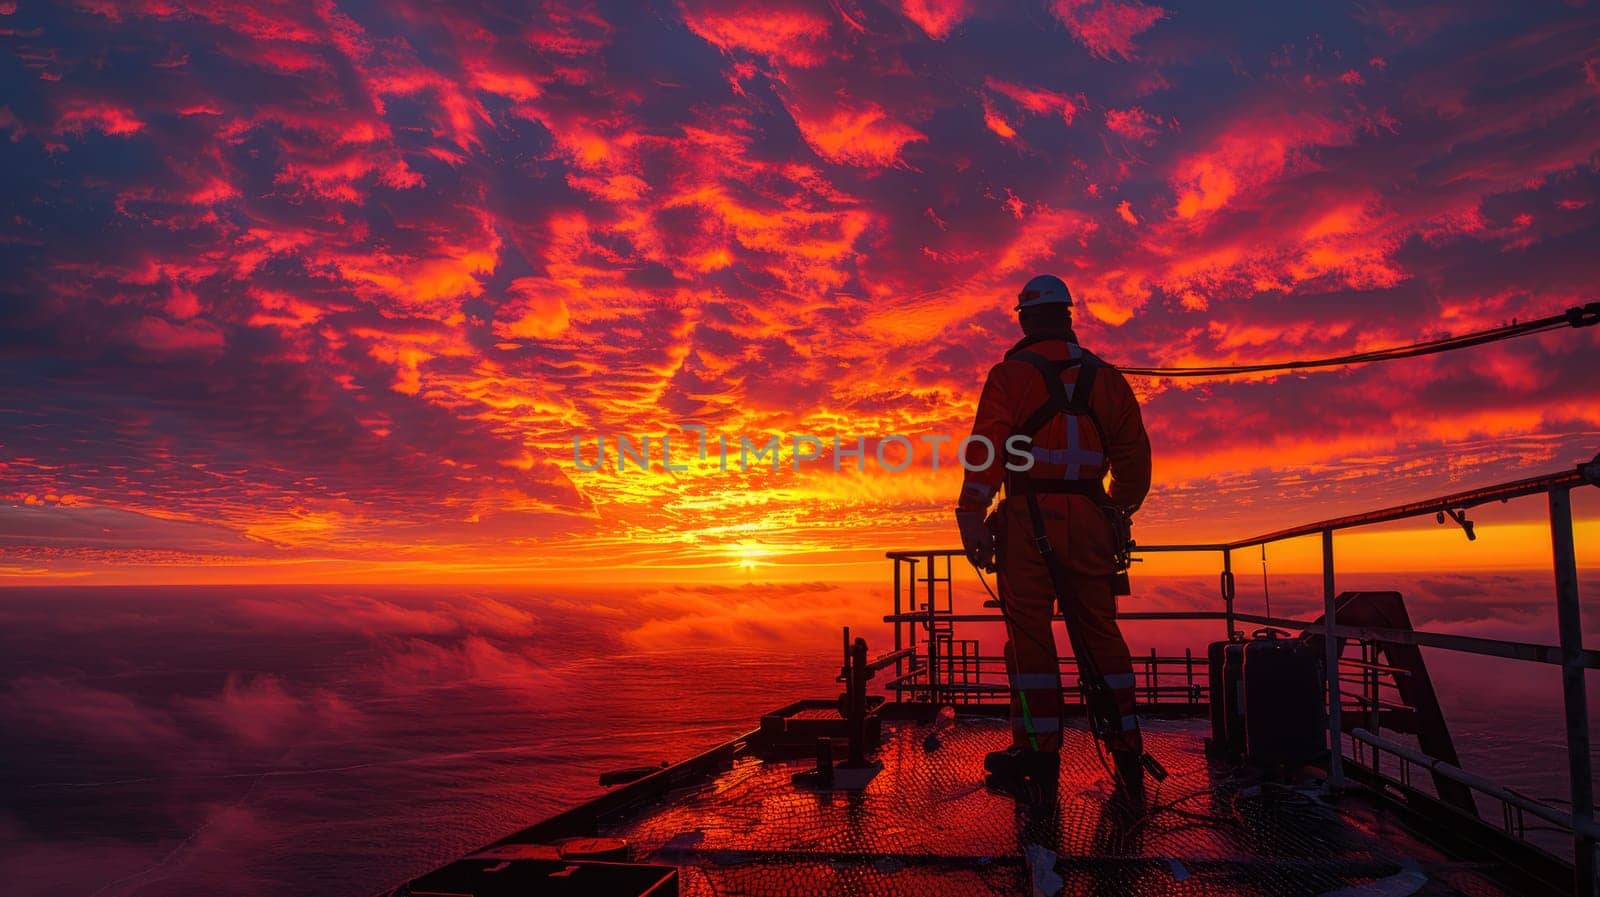 A silhouette of Engineer against a vibrant orange sunset, perched high a top-half oil rig